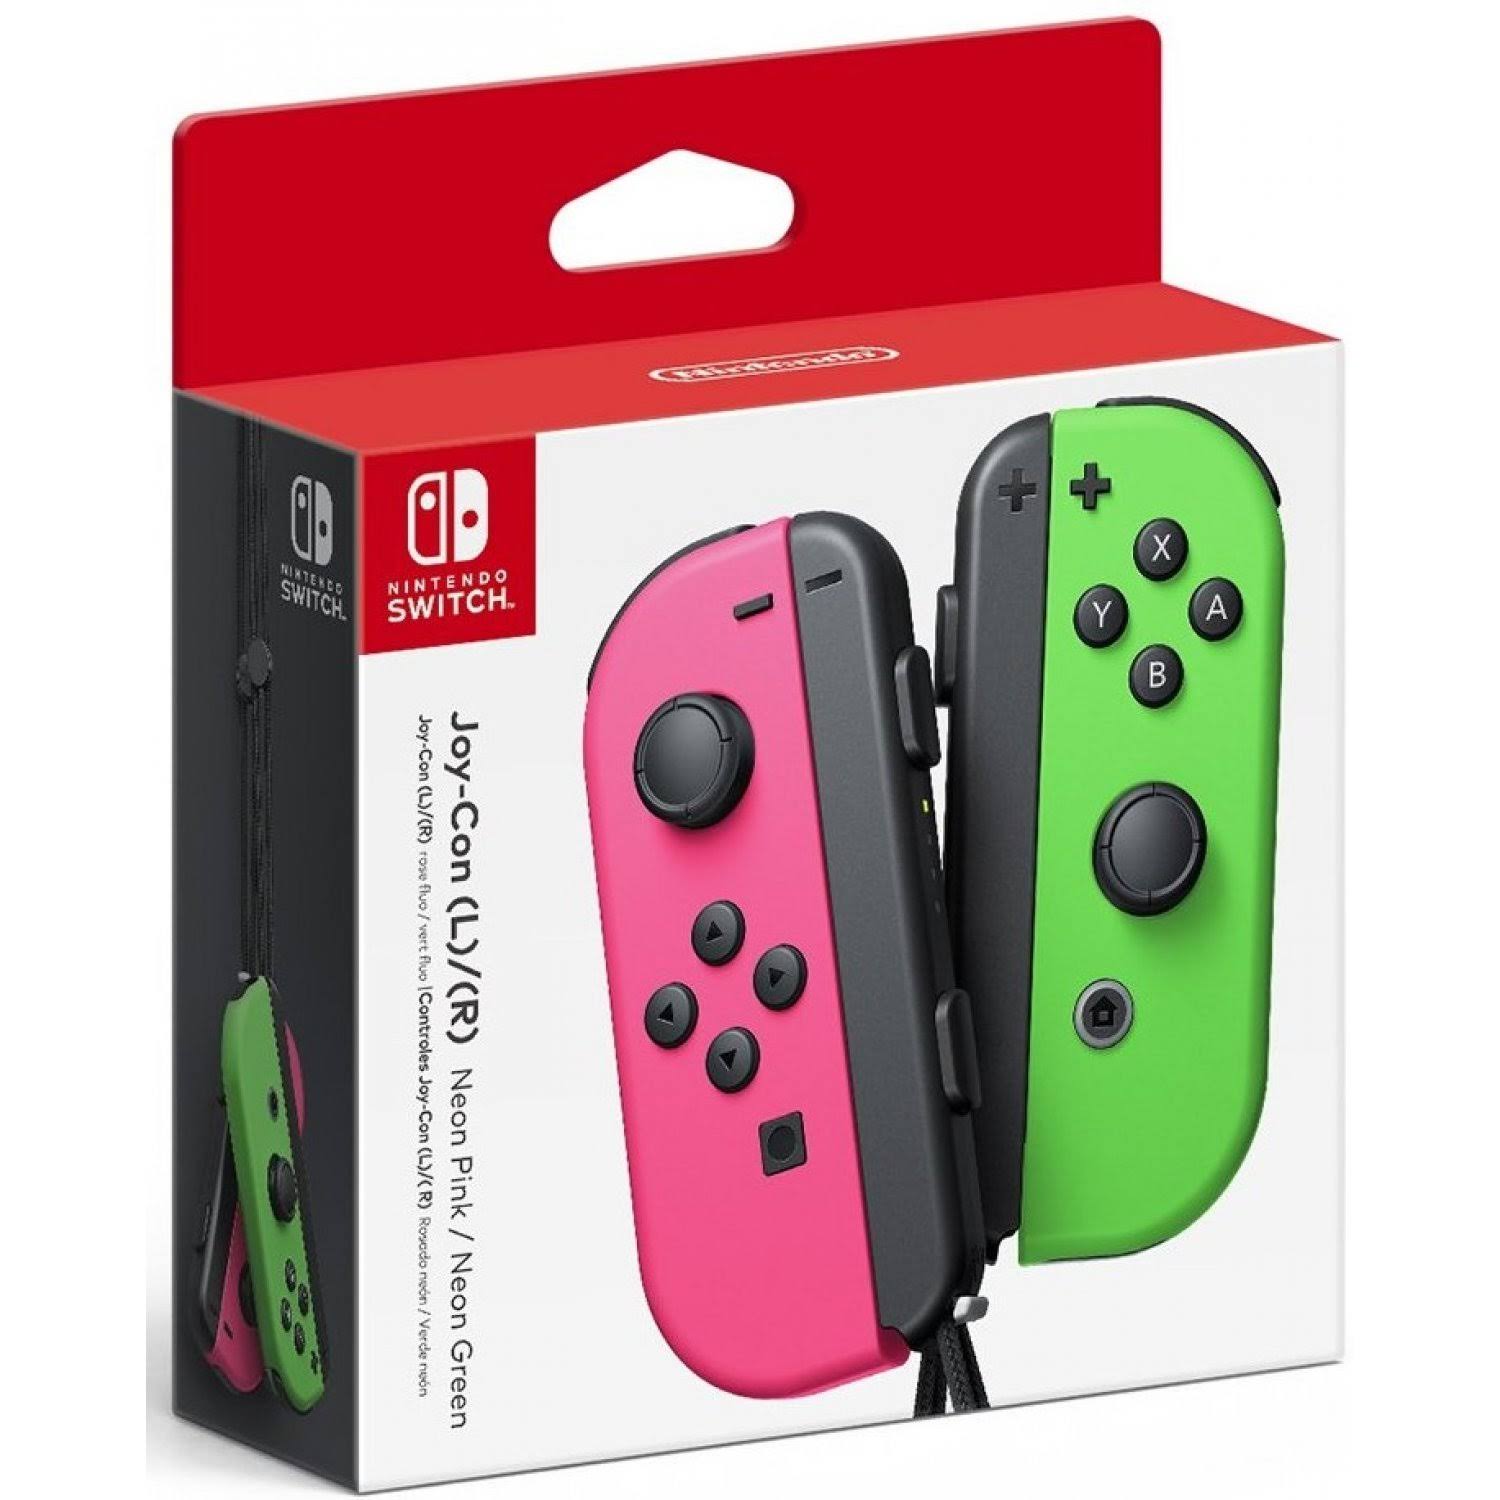 Nintendo Switch Joy-Con - Pair, Neon Pink and Neon Green